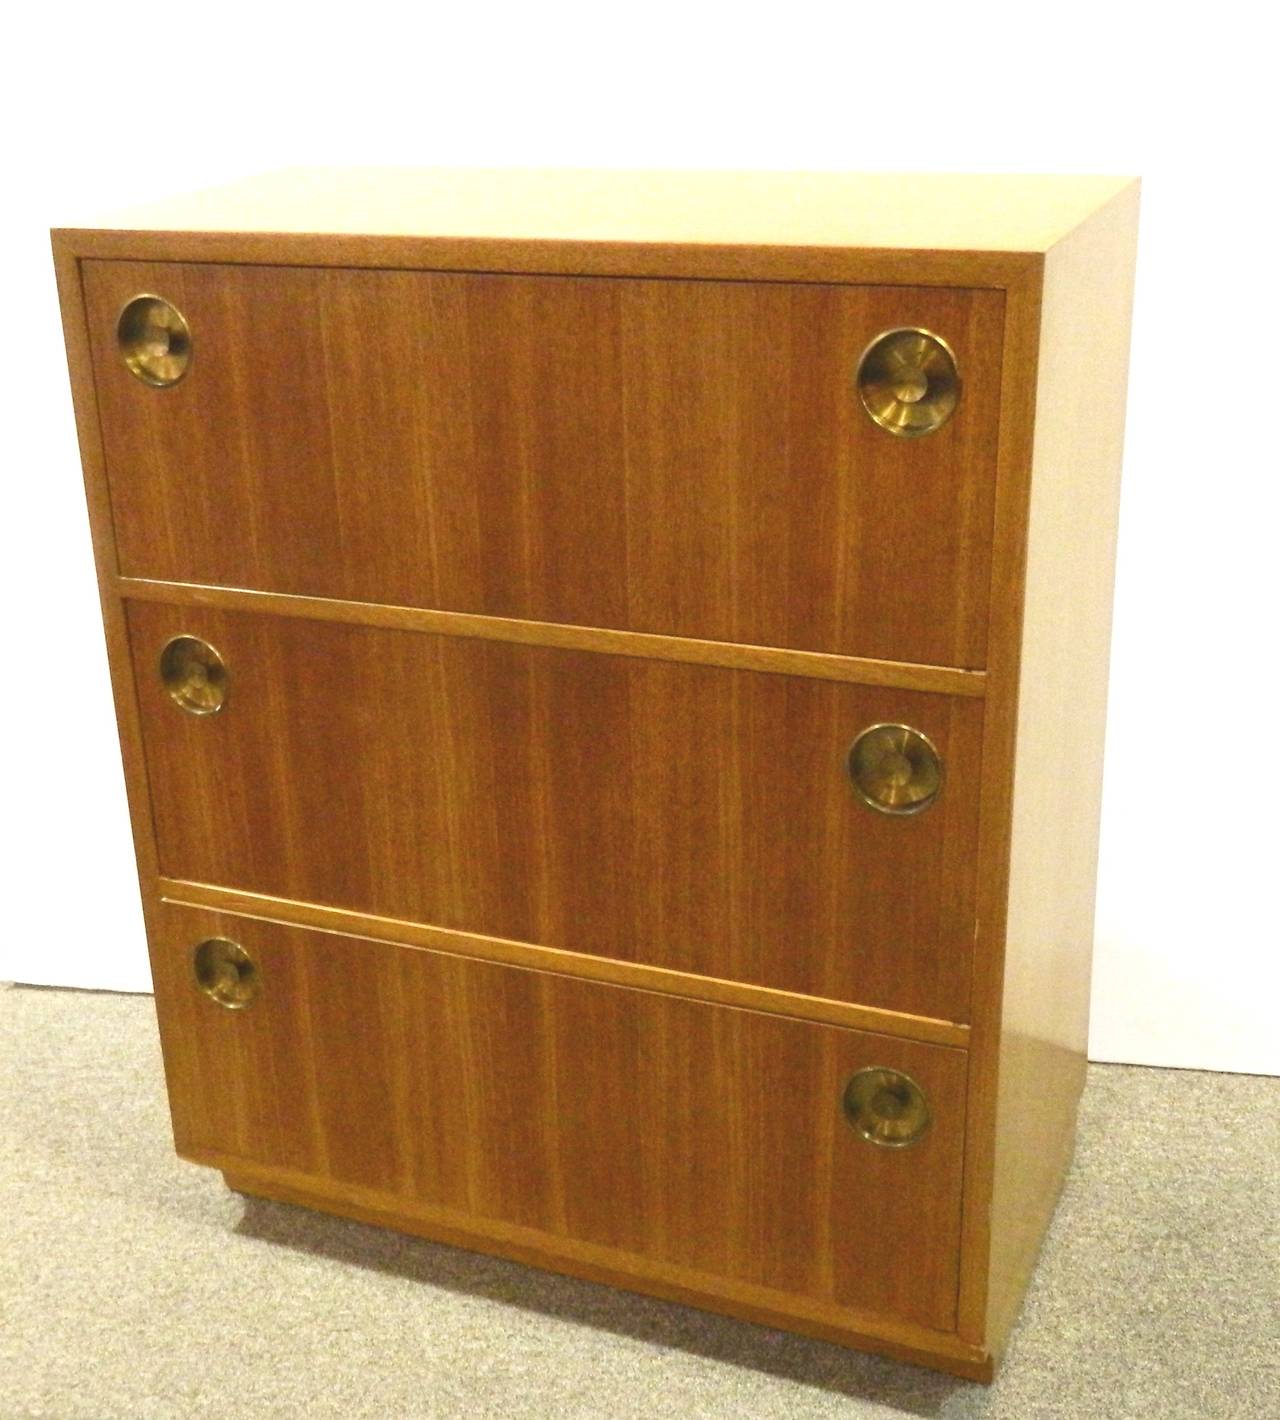 Group of four small three-drawer chests made by Dunbar, designed by Edward Wormley.
They are a subtle design with a slightly sloped front a 2 inch difference from top to bottom and inset metal handles. The can be used back to back to form a cube,